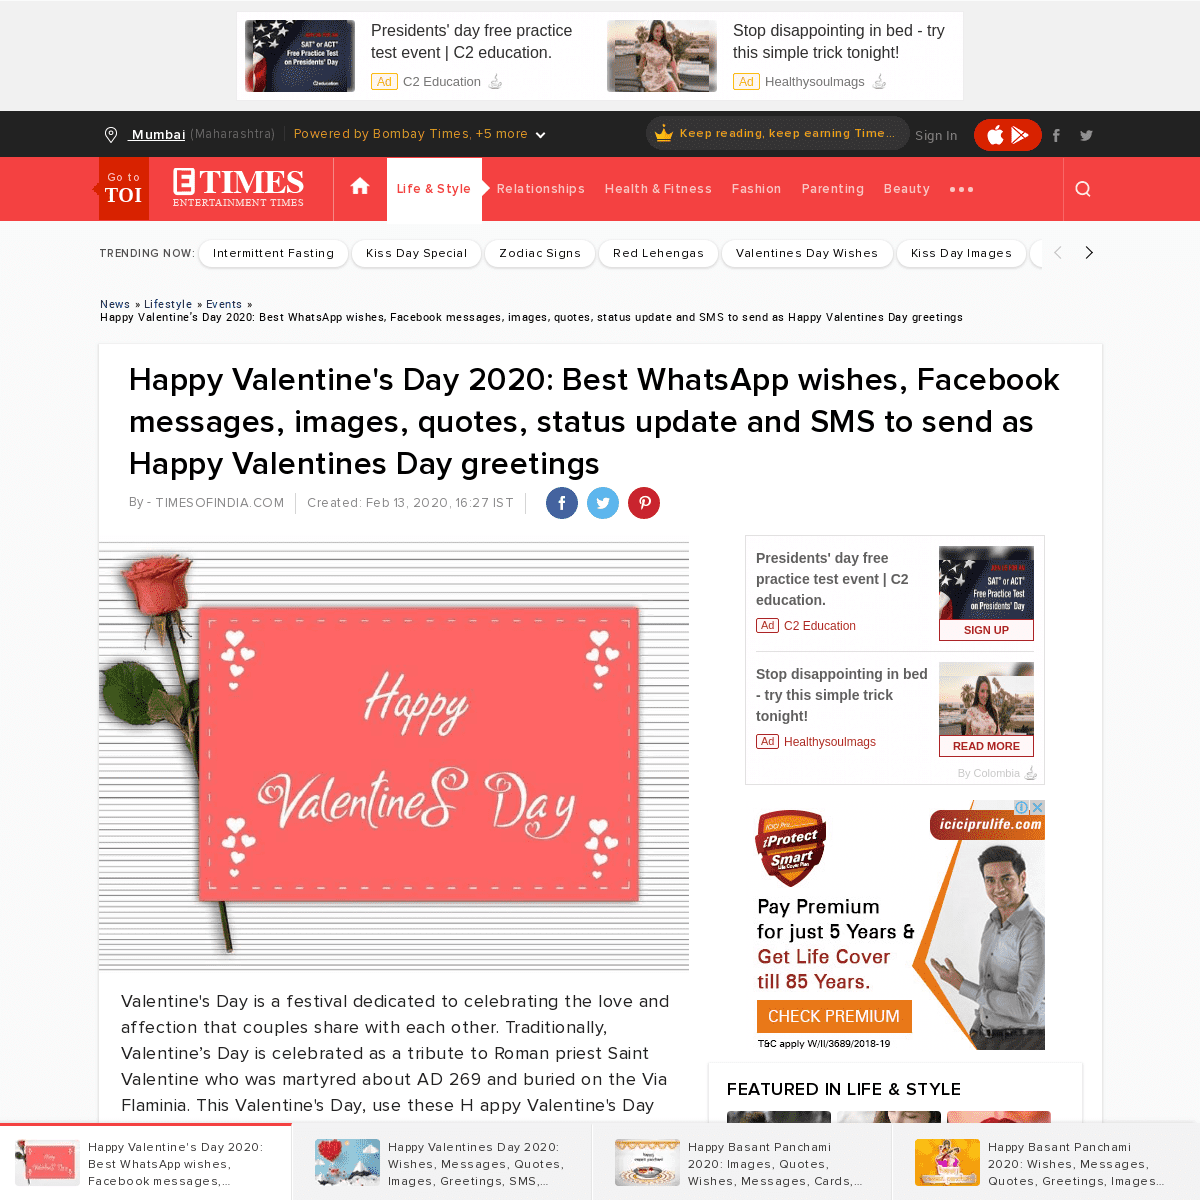 A complete backup of timesofindia.indiatimes.com/life-style/events/happy-valentines-day-2020-wishes-messages-quotes-images-best-